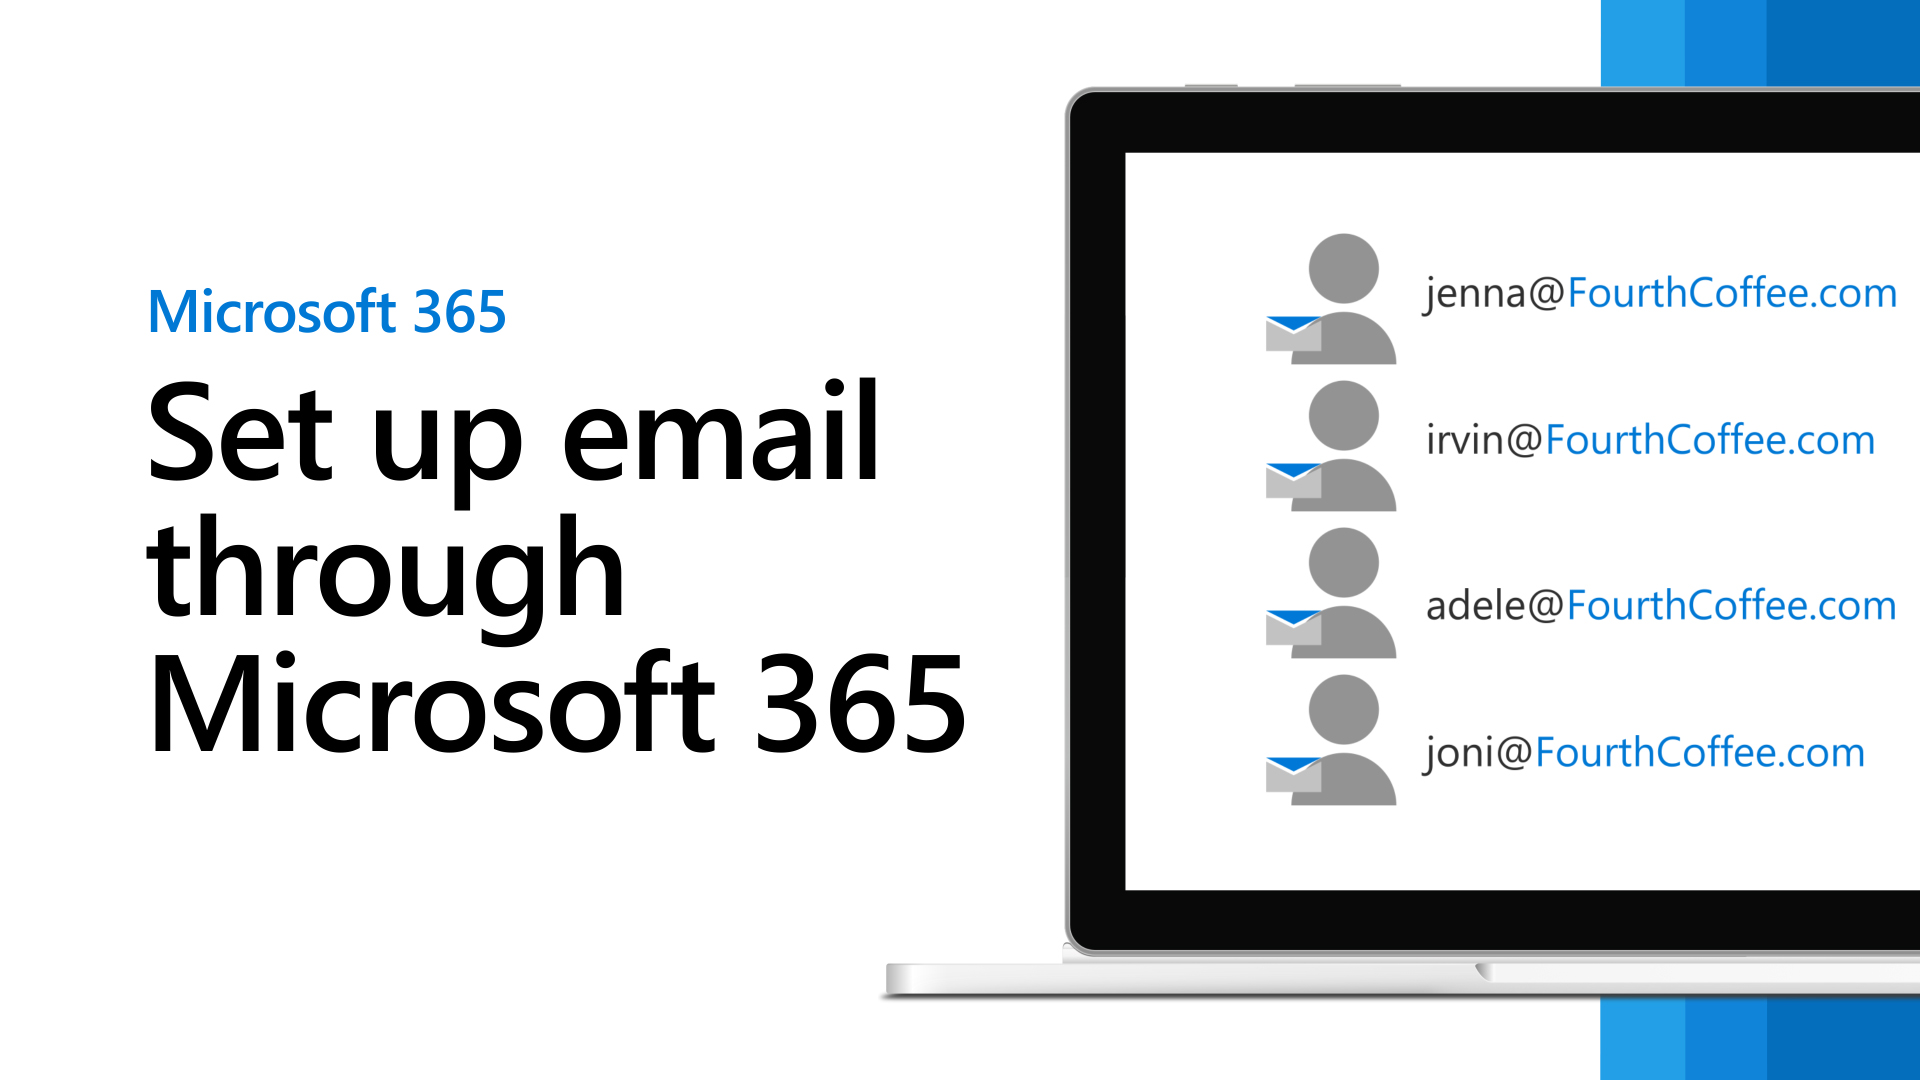 How to set up a custom email domain on Microsoft 365 Family and